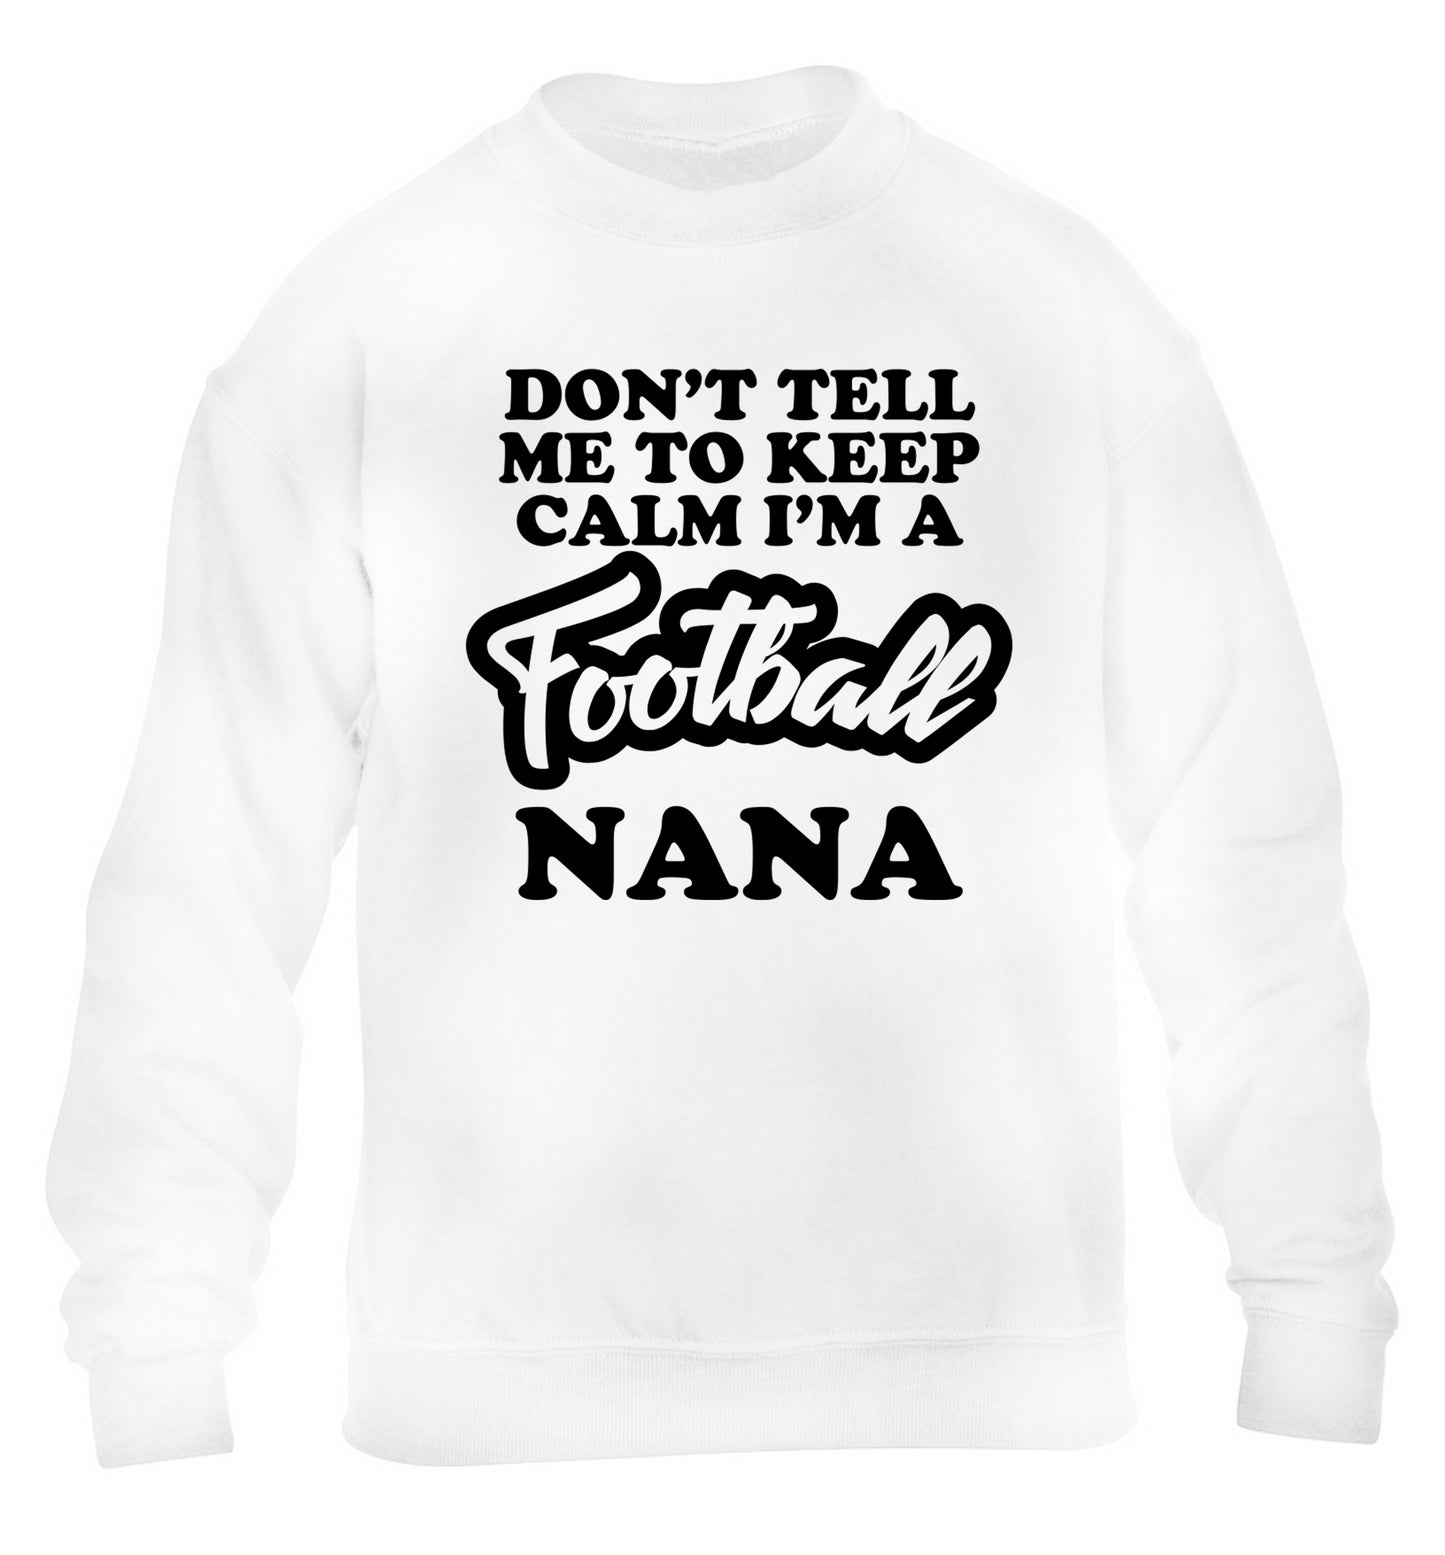 Don't tell me to keep calm I'm a football nana children's white sweater 12-14 Years